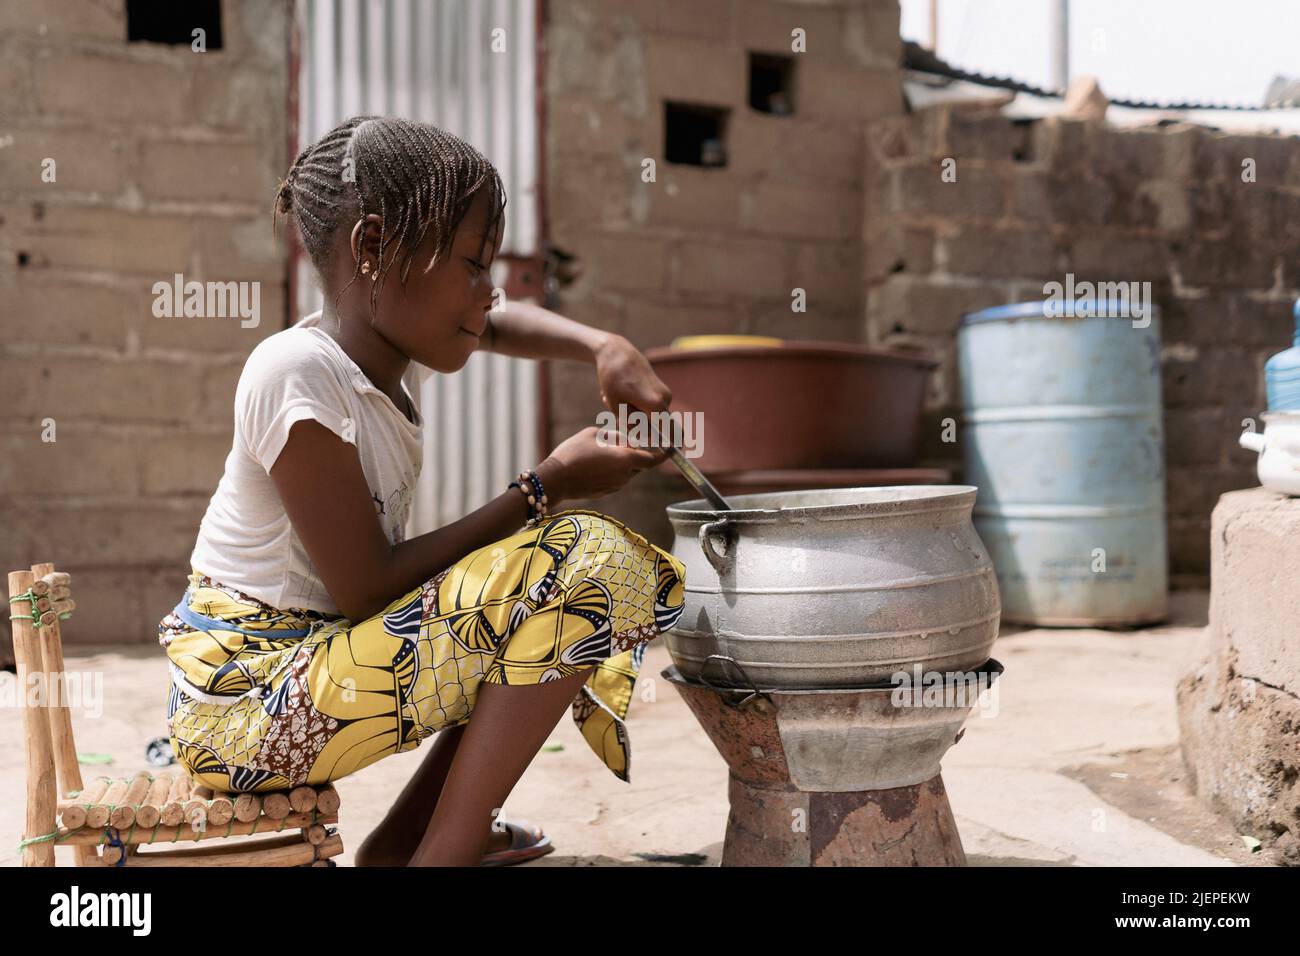 Small African girl sitting in front of a simple charcoal stove intent on mixing the contents of a large metal pot; traditional food preparation Stock Photo